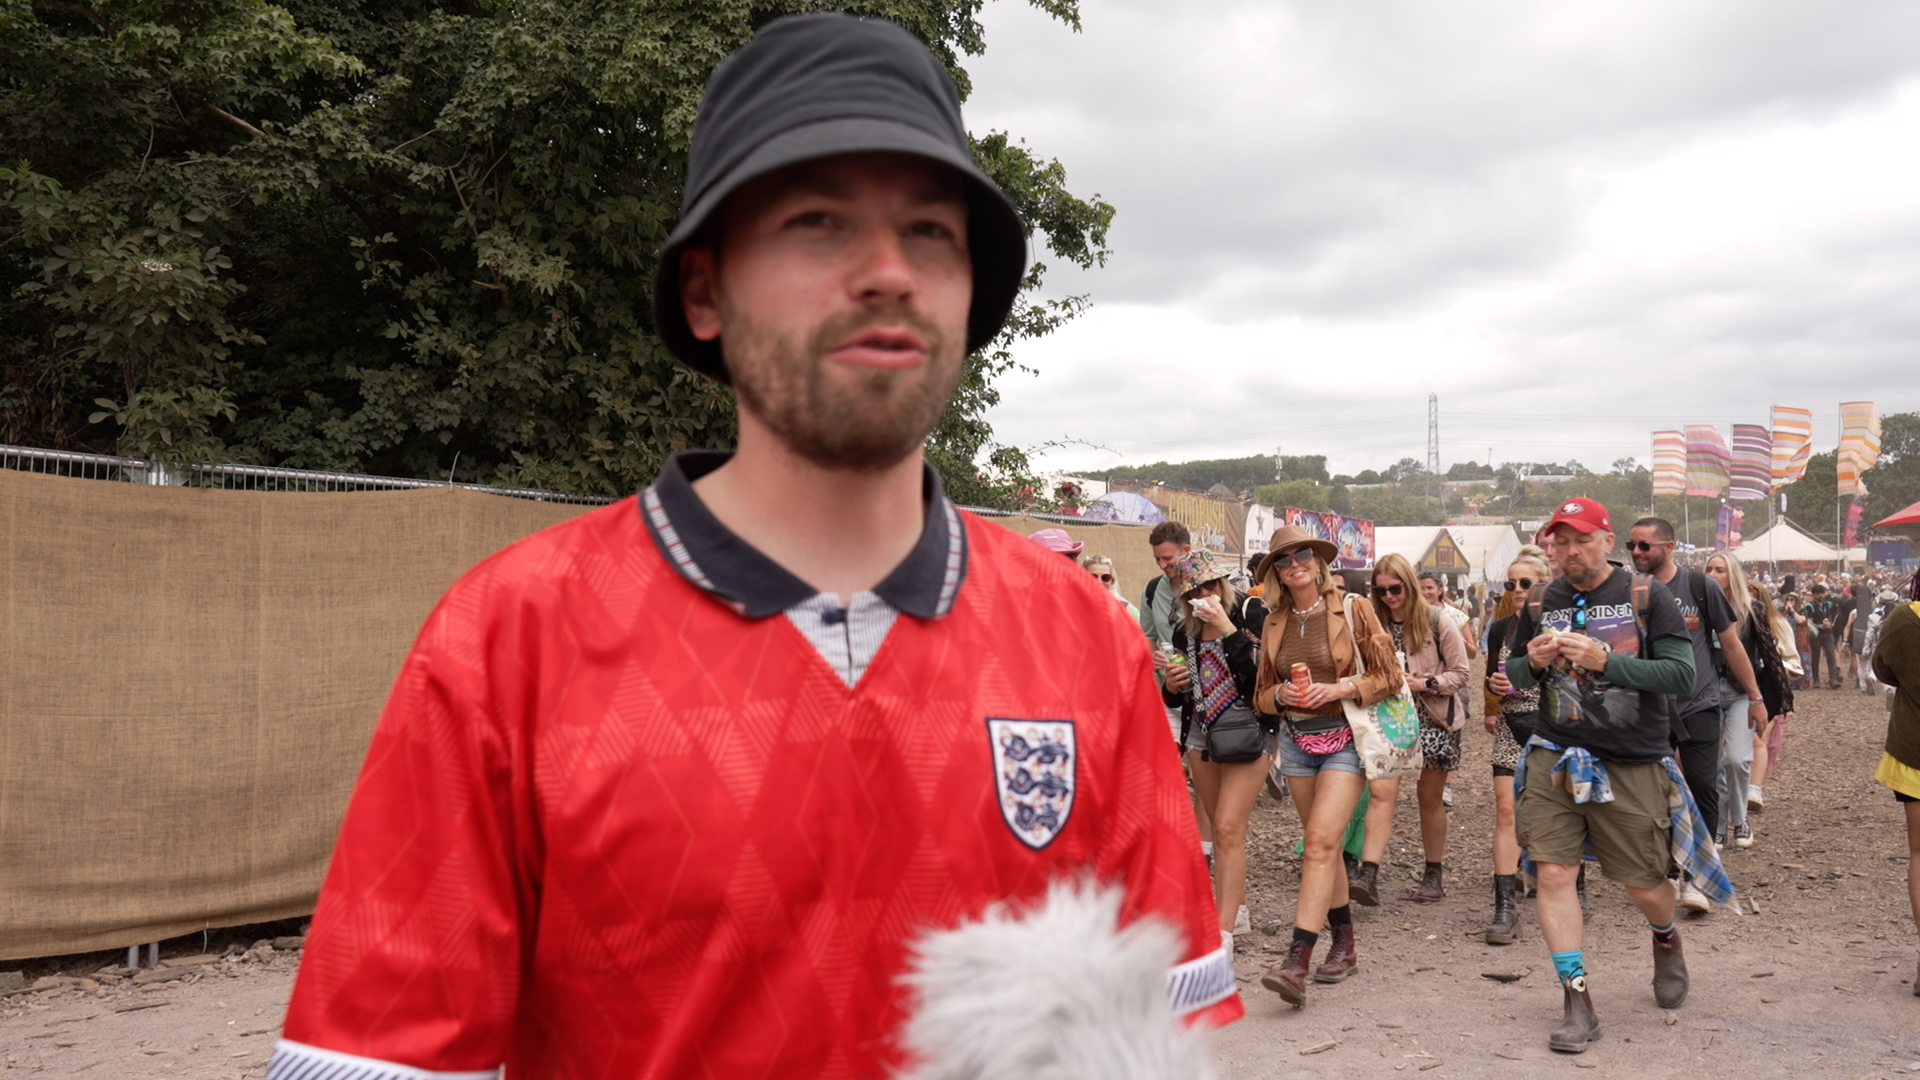 Alistair Tomlinson wearing a red England shirt and a black bucket hat at Glastonbury 